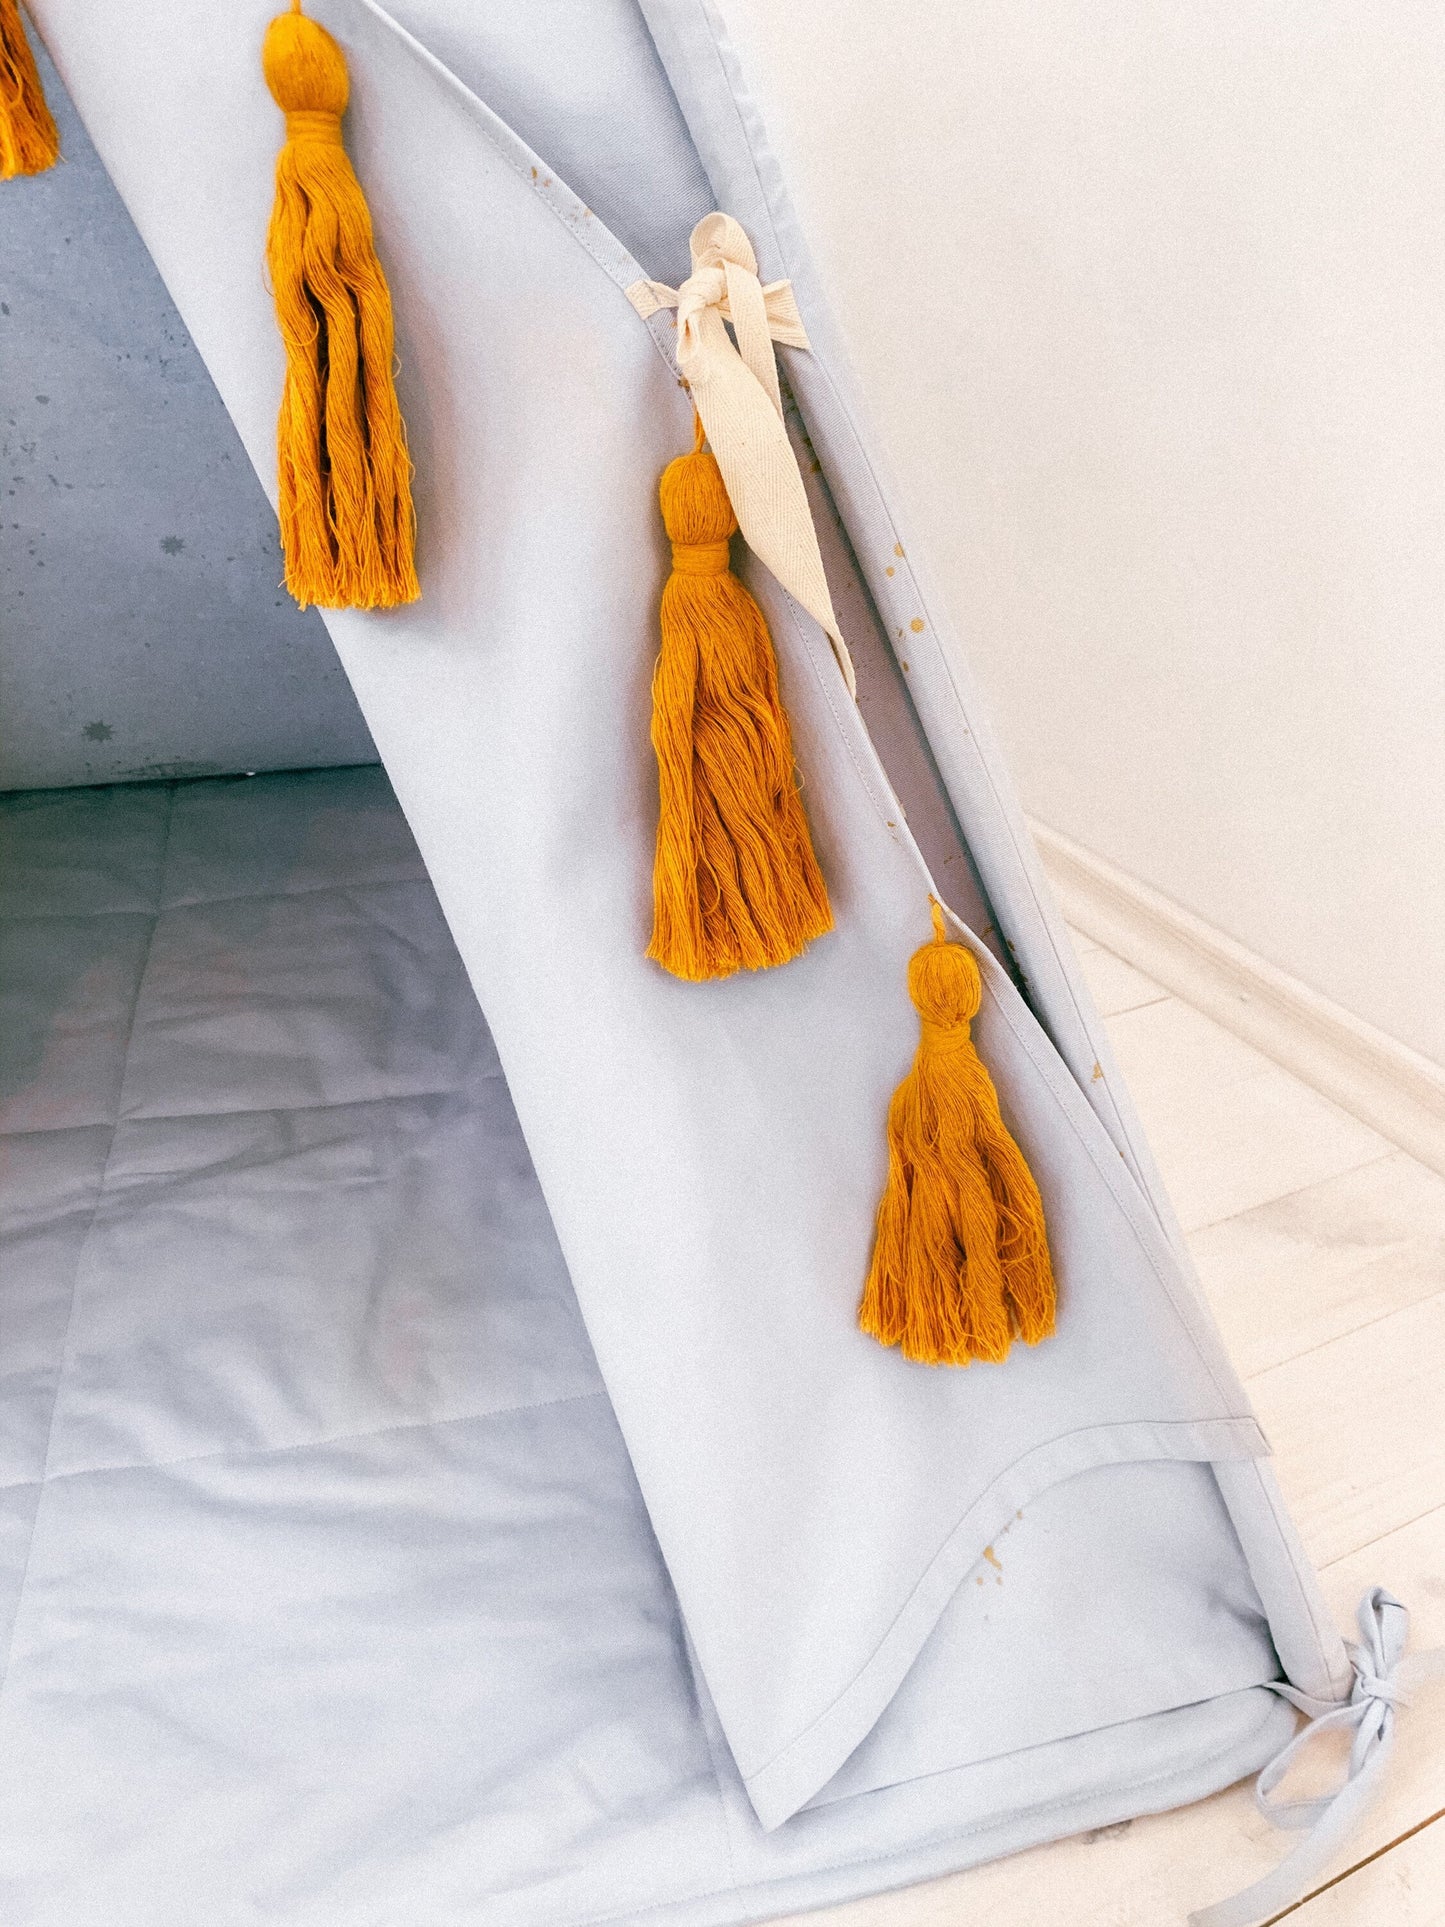 Light gray teepee with golden stars and mustards macrame tassels - first birthday